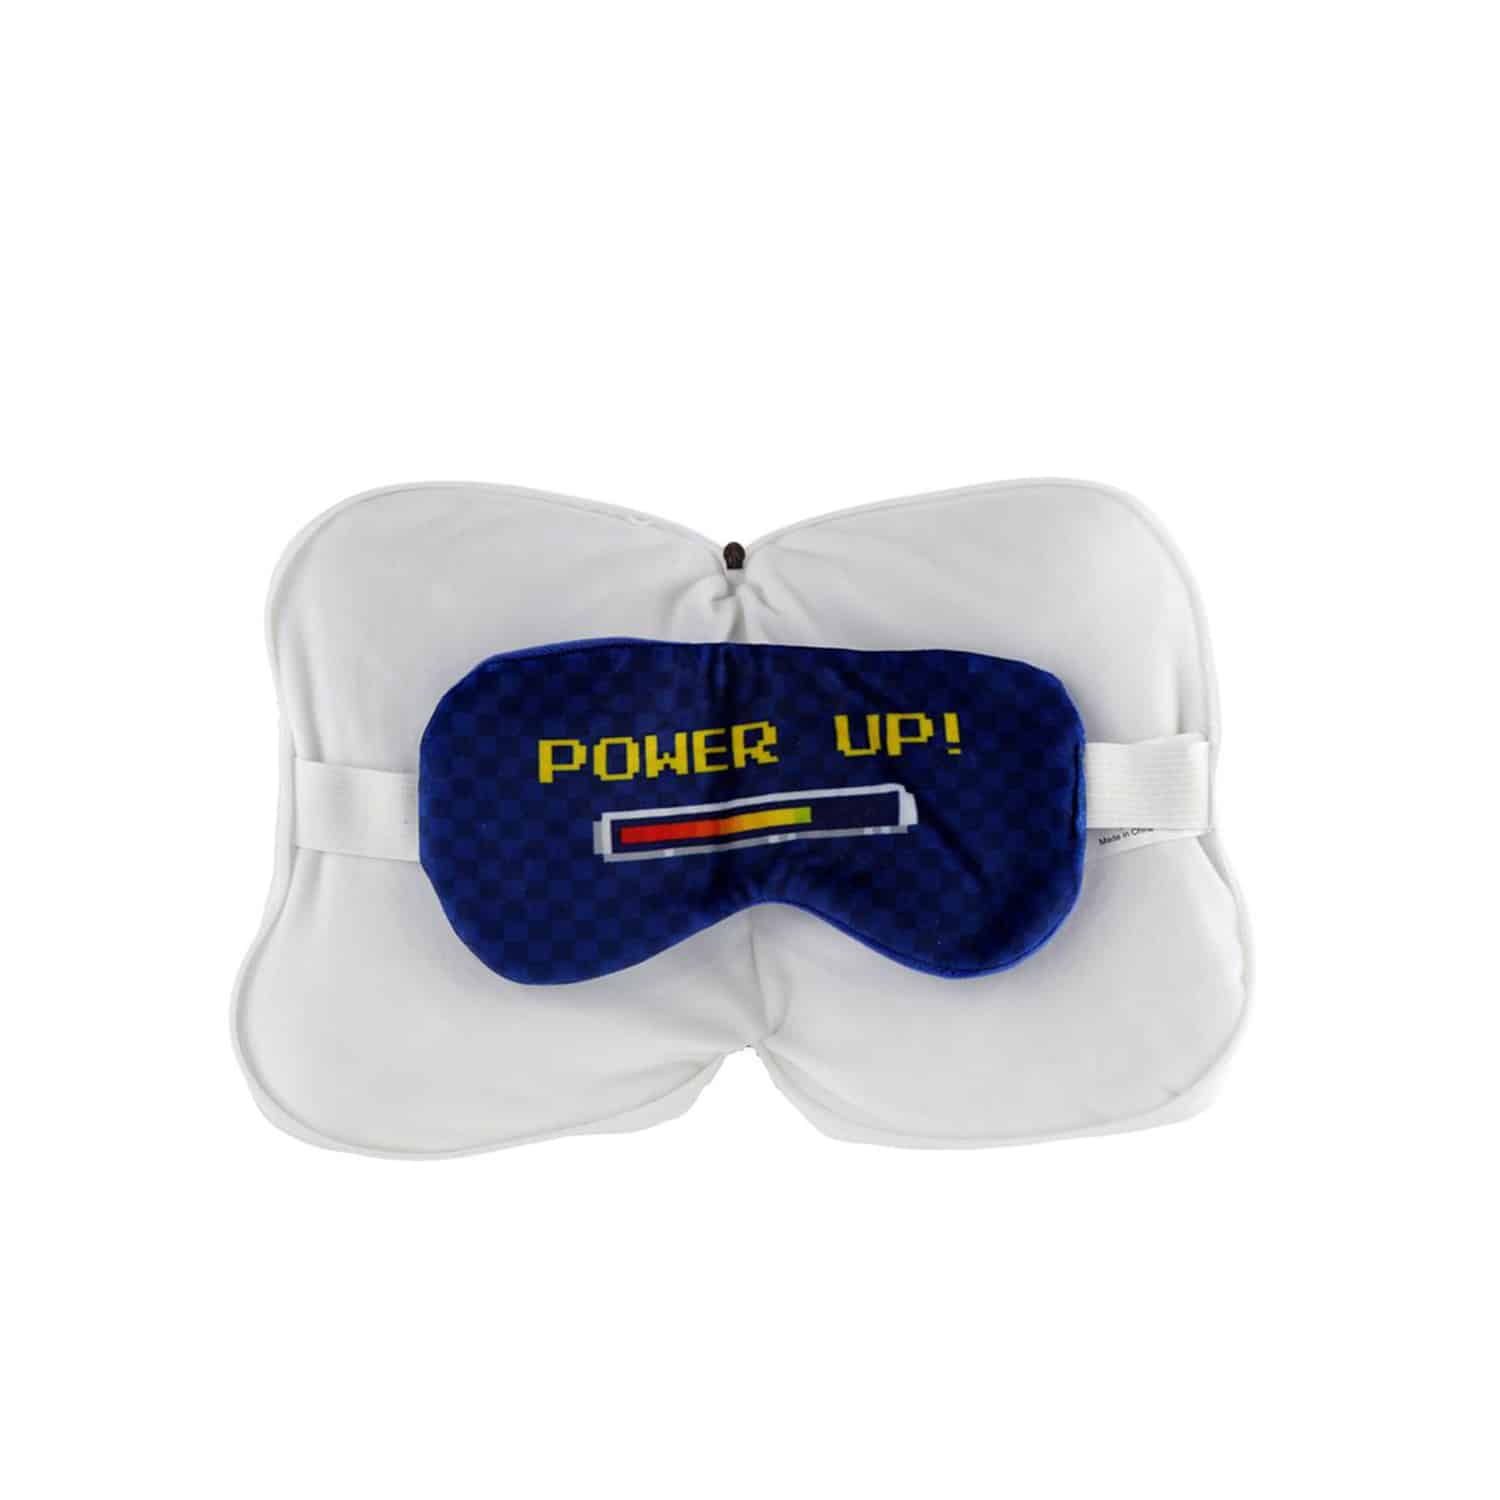 Relaxeazzz Game Over Handheld Console Travel Pillow & Eye Mask